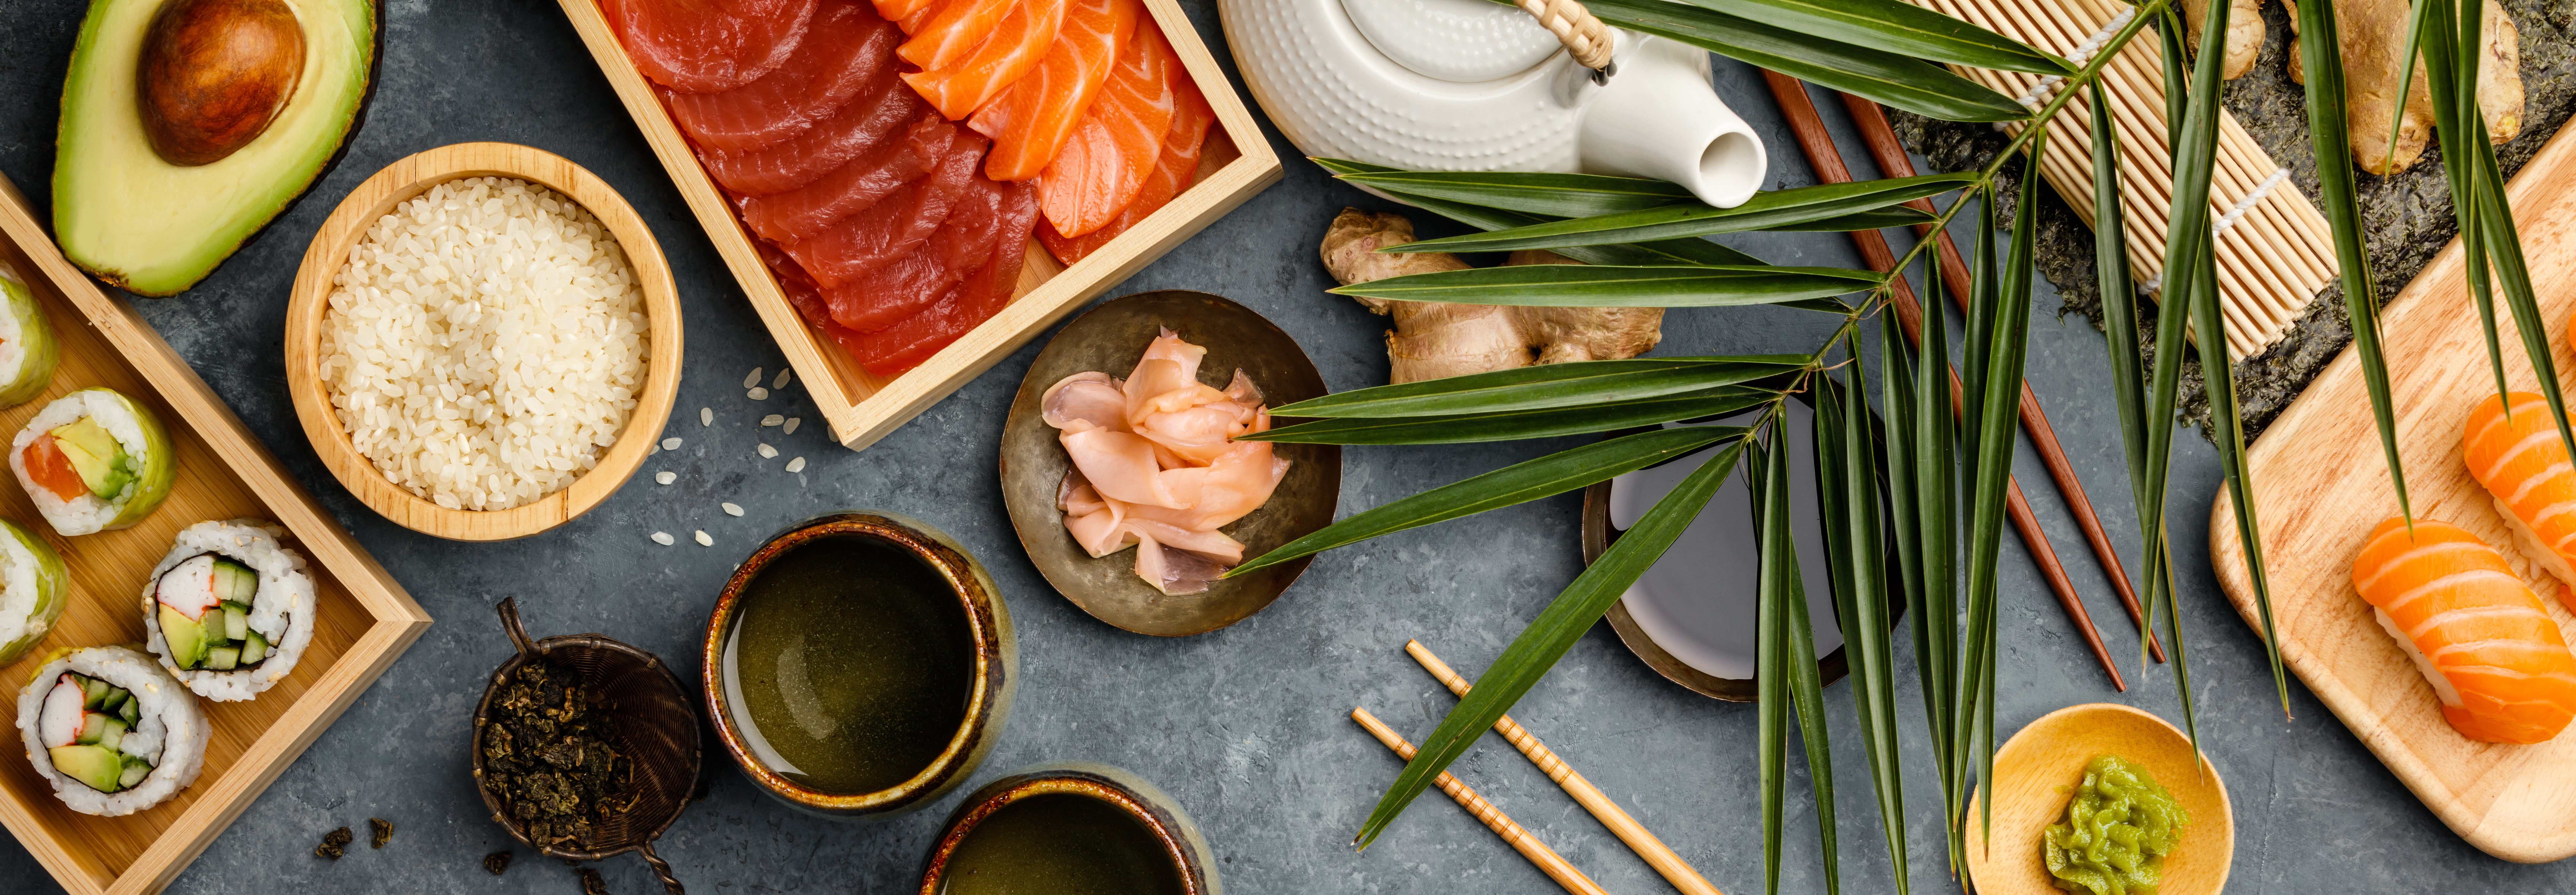 Overhead shot of ingredients for sushi, green tea and prepared maki and nigiri on dark blue background. Raw salmon and tuna pieses, rice, avocado, pickled ginger gari , raw ginger, wasabi, soy sauce, hopsticks. Asian food background. Space for text. Top view